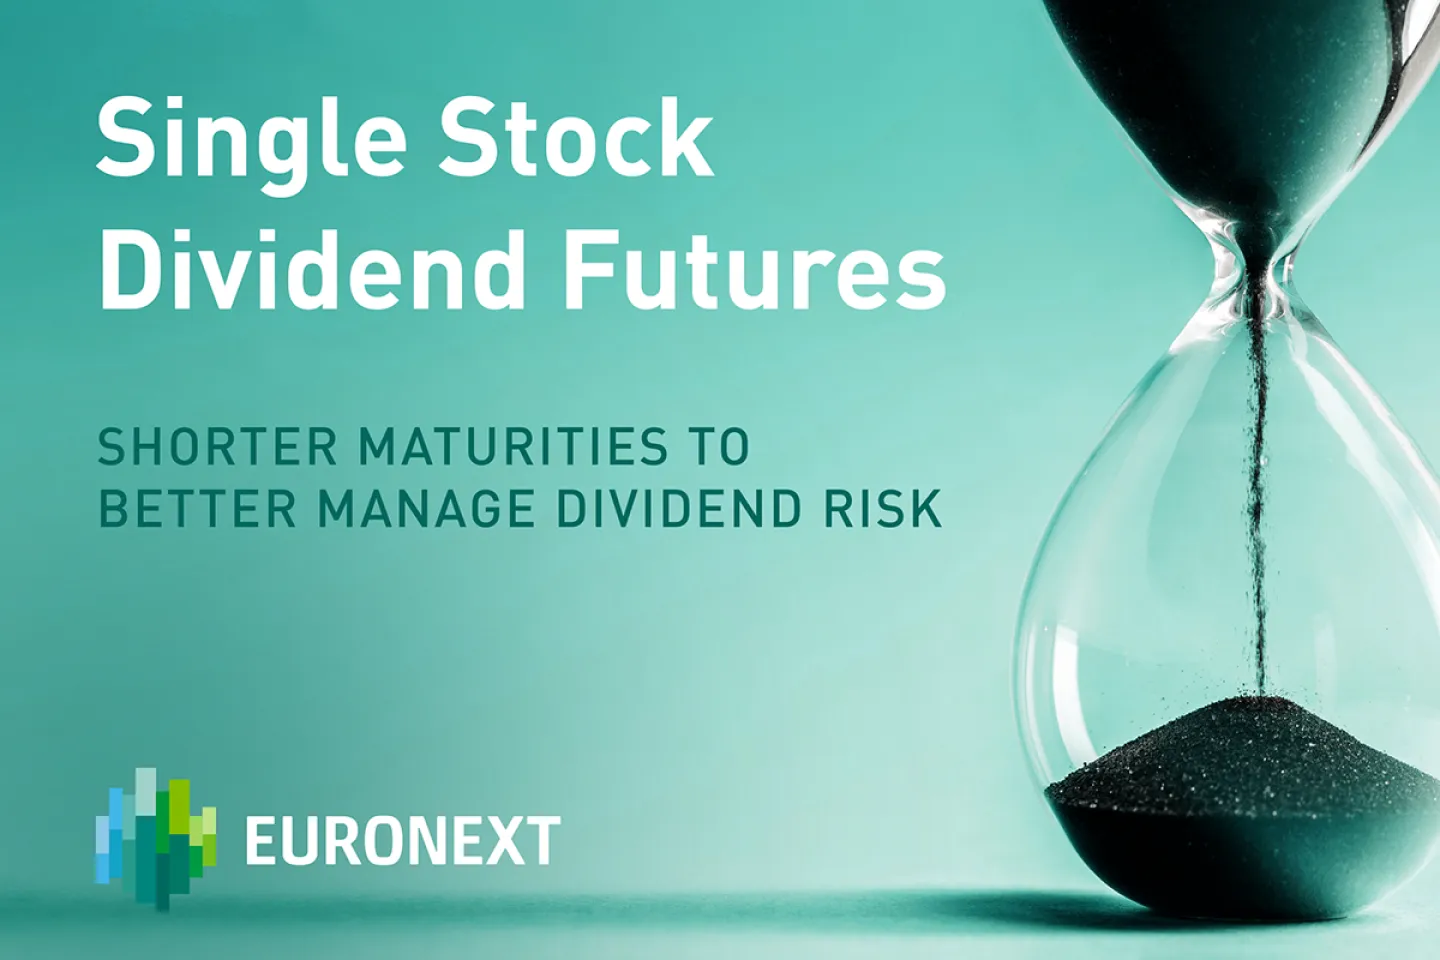 Hourglass Single Stock Dividend Futures. Shorter maturities to better manage dividend risk.